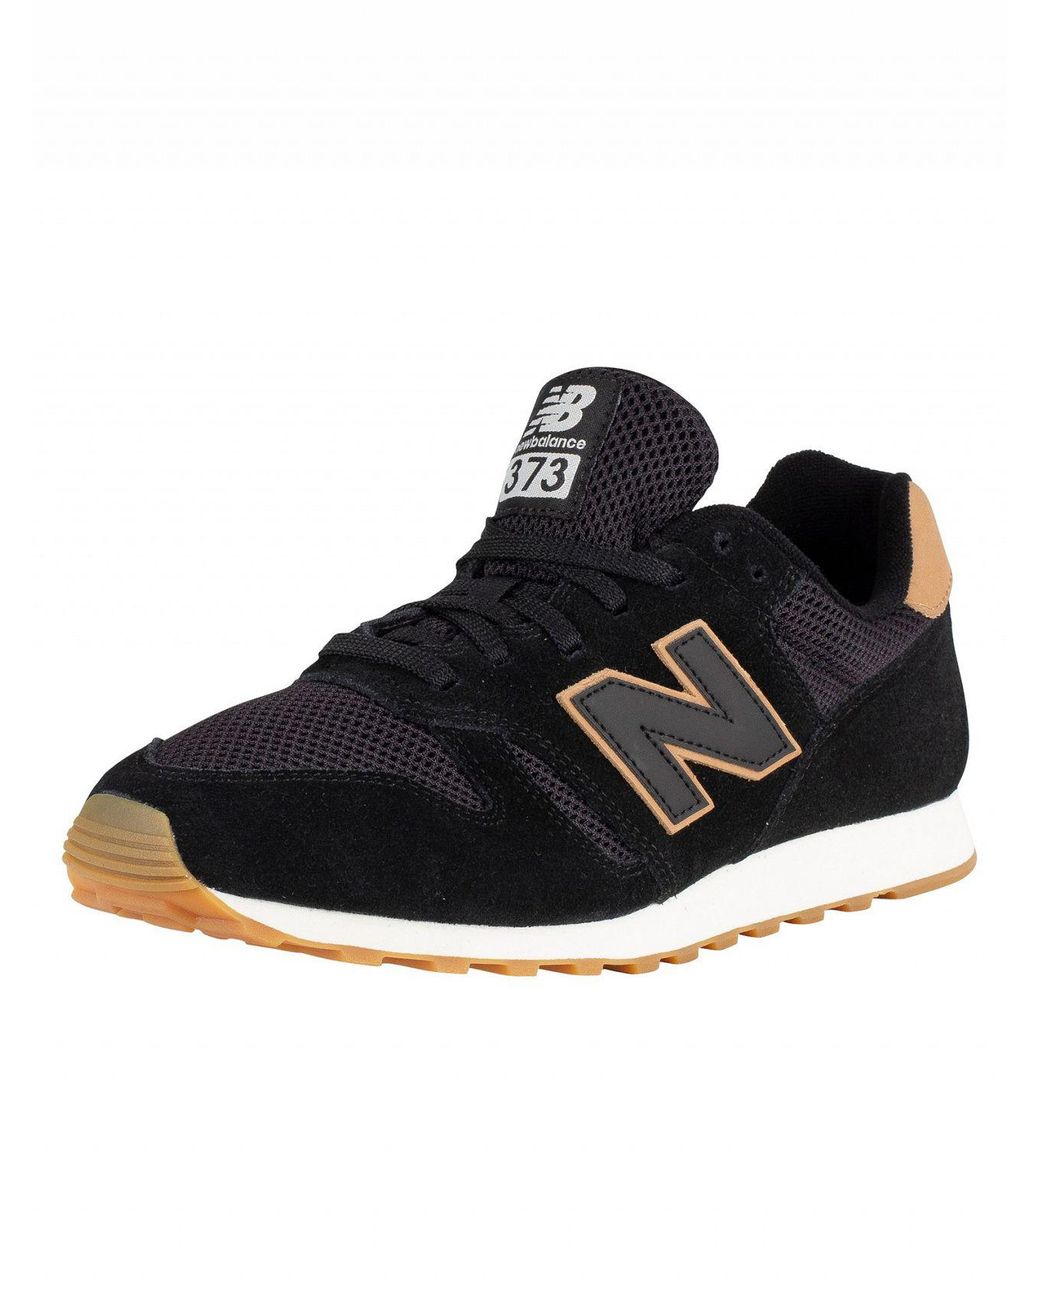 Intimate automaton Dexterity New Balance Black/tan 373 Suede Trainers for Men | Lyst